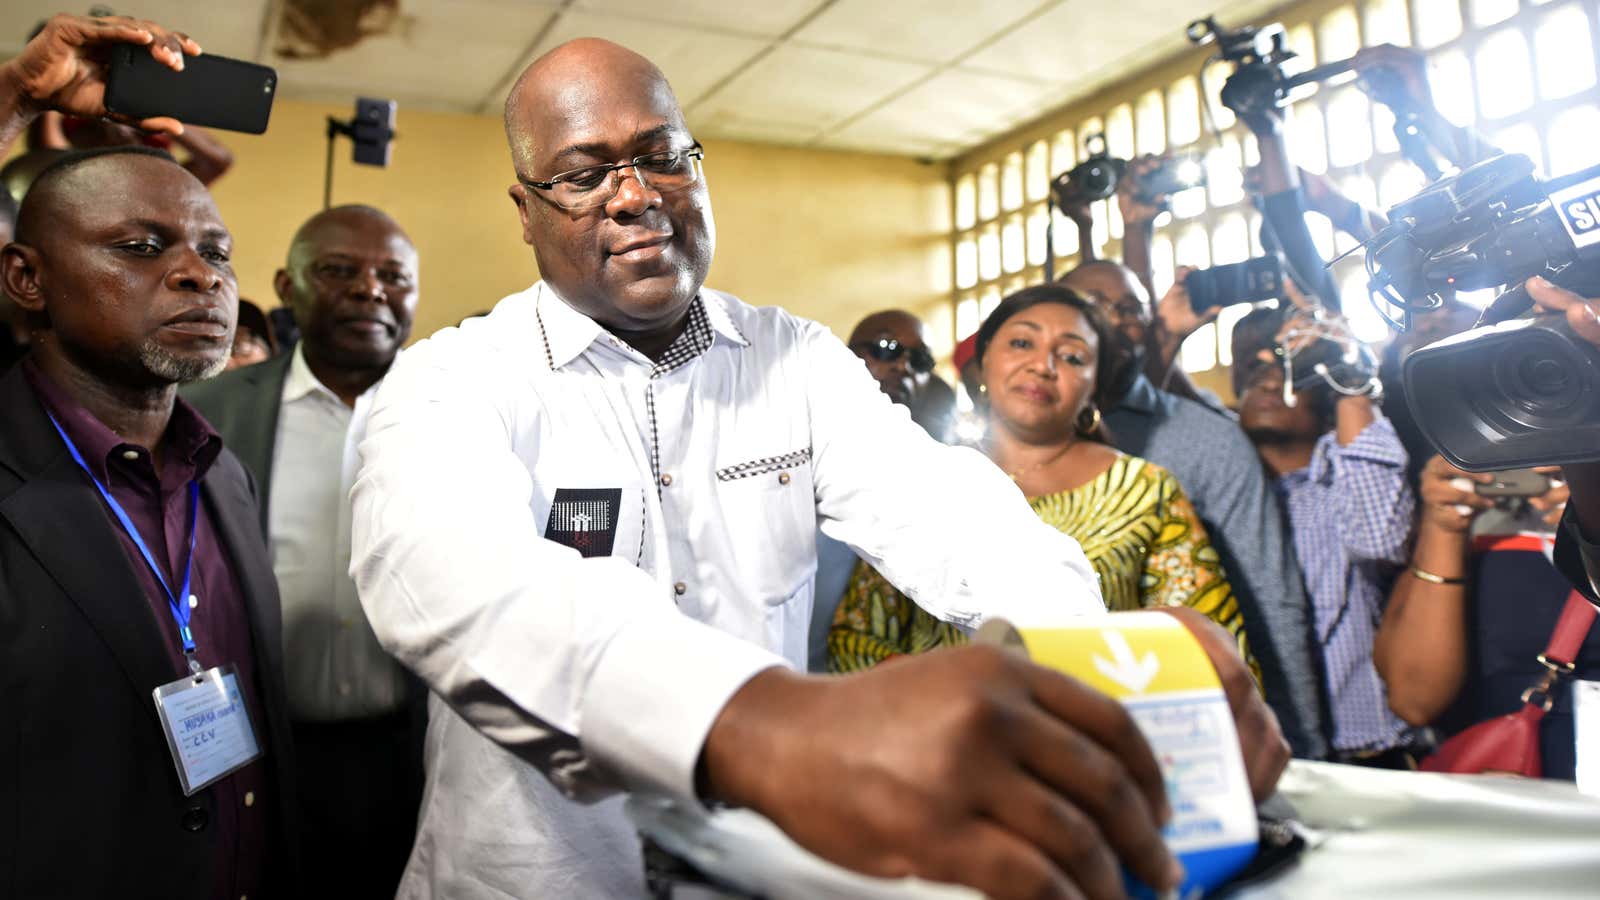 Felix Tshisekedi, leader of the Congolese main opposition party, the Union for Democracy and Social Progress (UDPS)